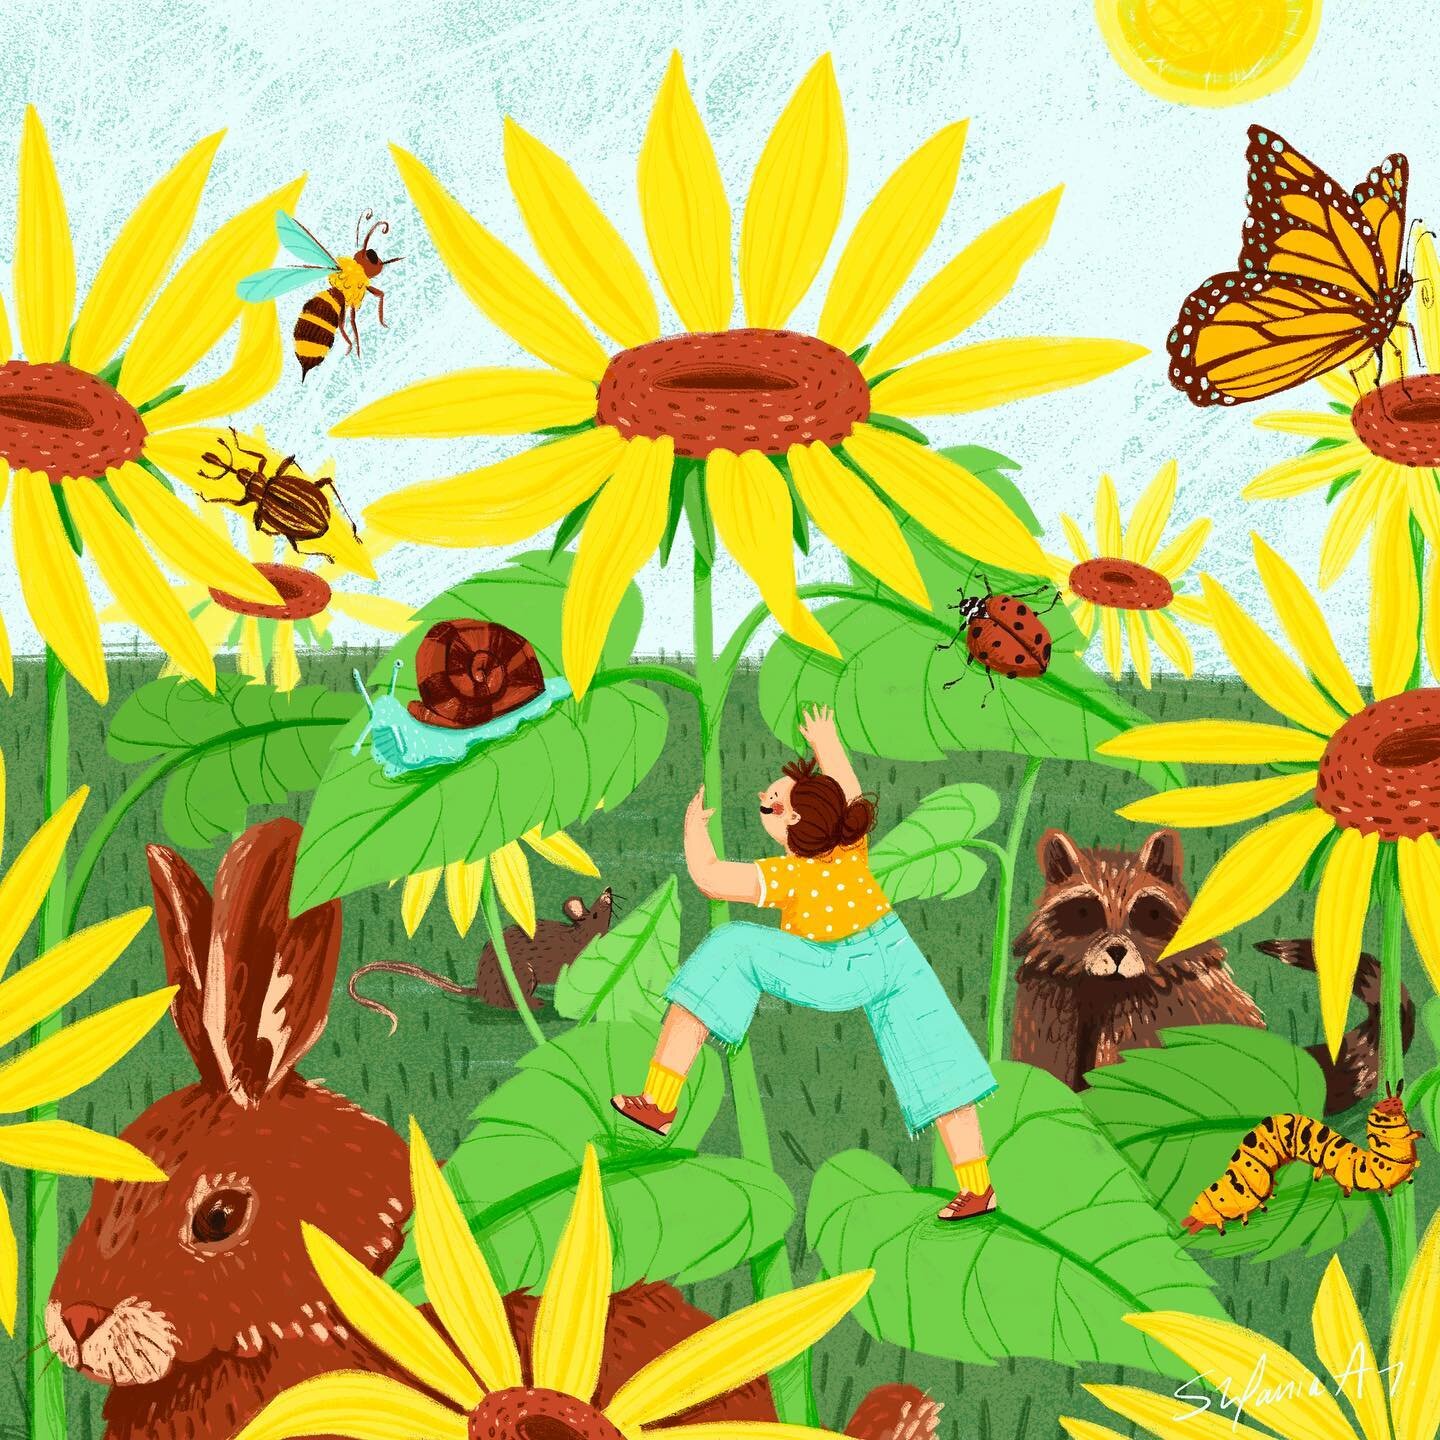 &lsquo;Biodiversity&rsquo;
For this prompt I explored part of the ecosystem that surrounds sunflowers. I illustrated just a few of the creatures that are attracted to sunflowers as much as I am. 
Adding to @ourplanetweek  challenge. A tree will be pl